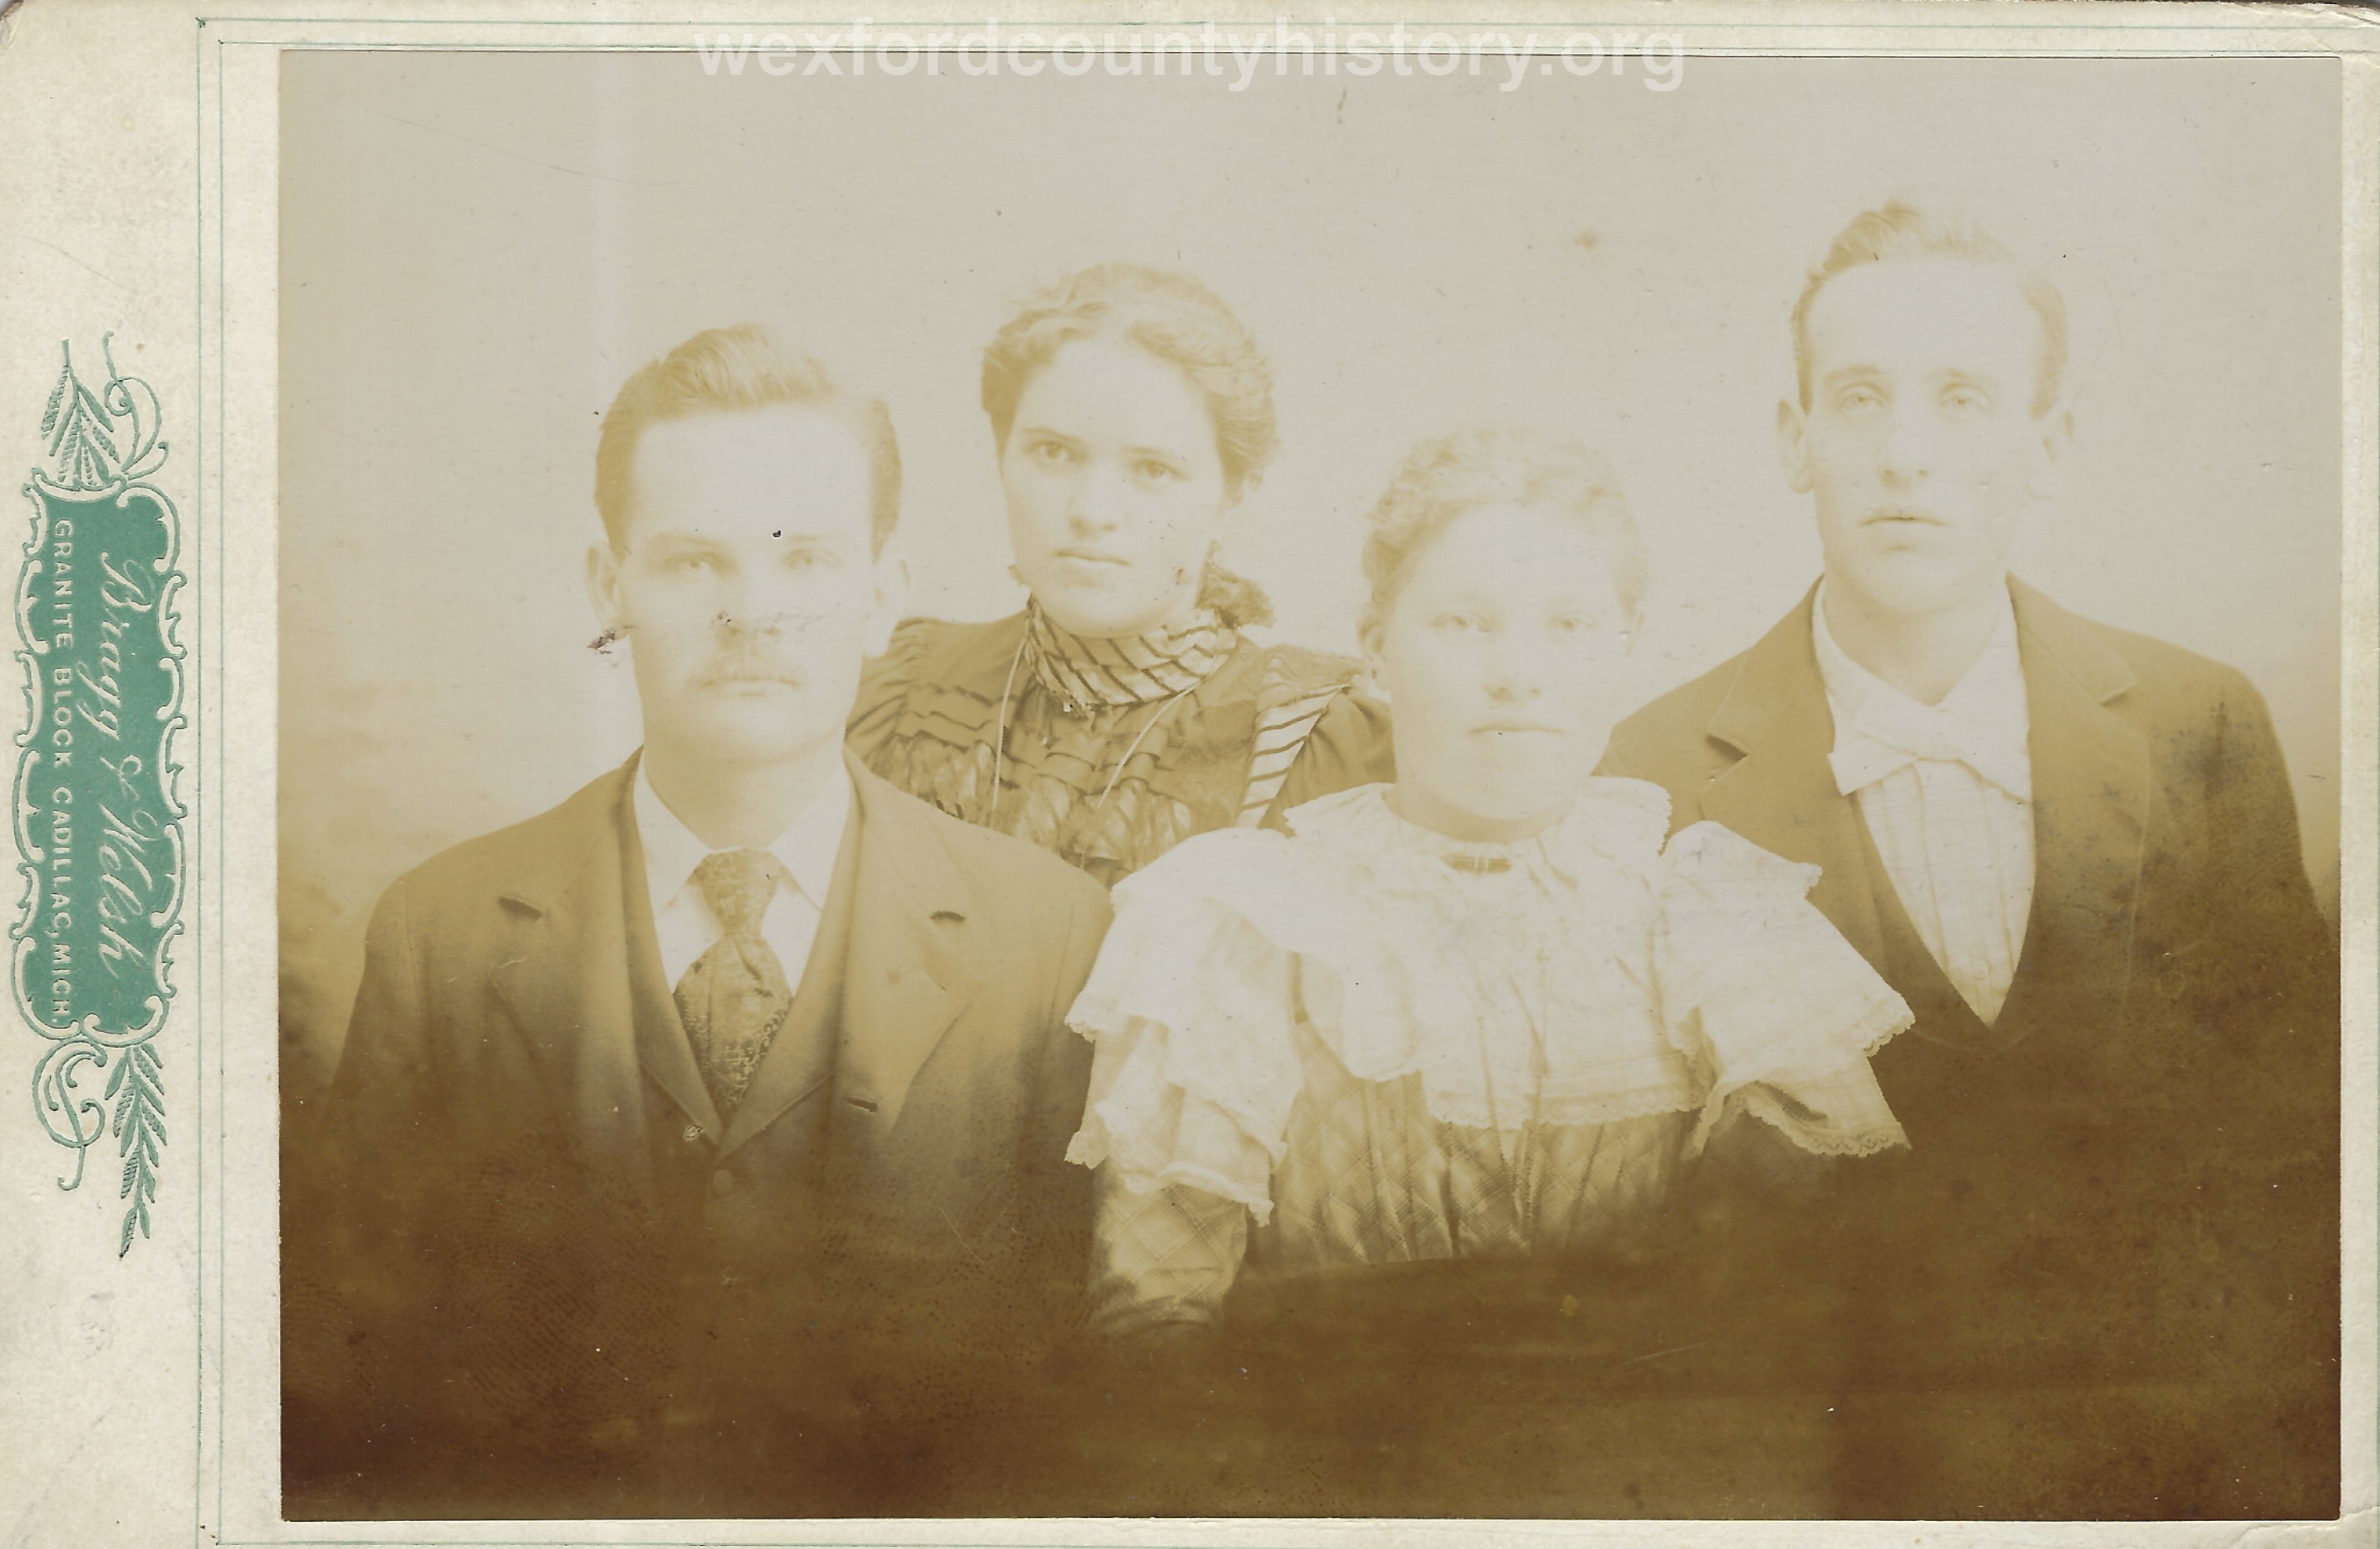 Person Family in 1898